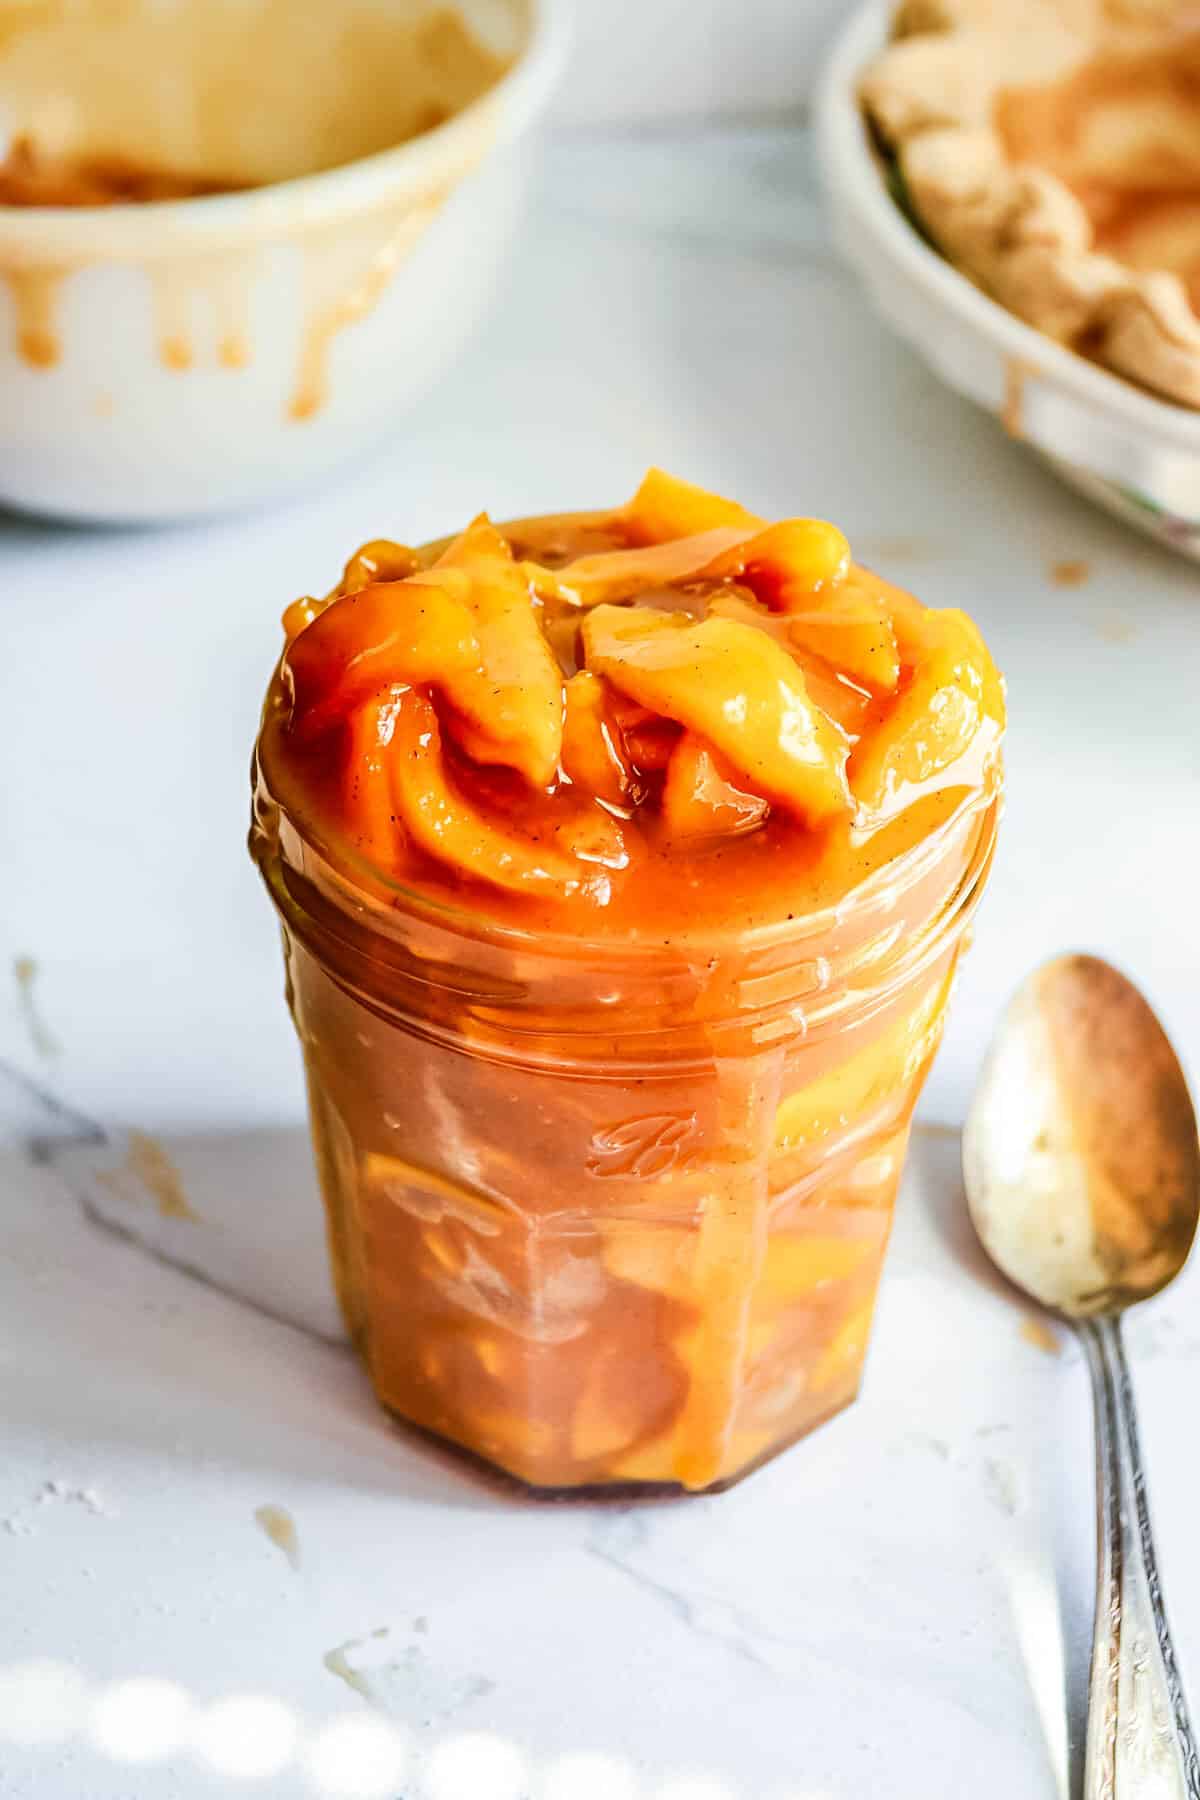 Caramel apple pie filling in a glass jar with a spoon.